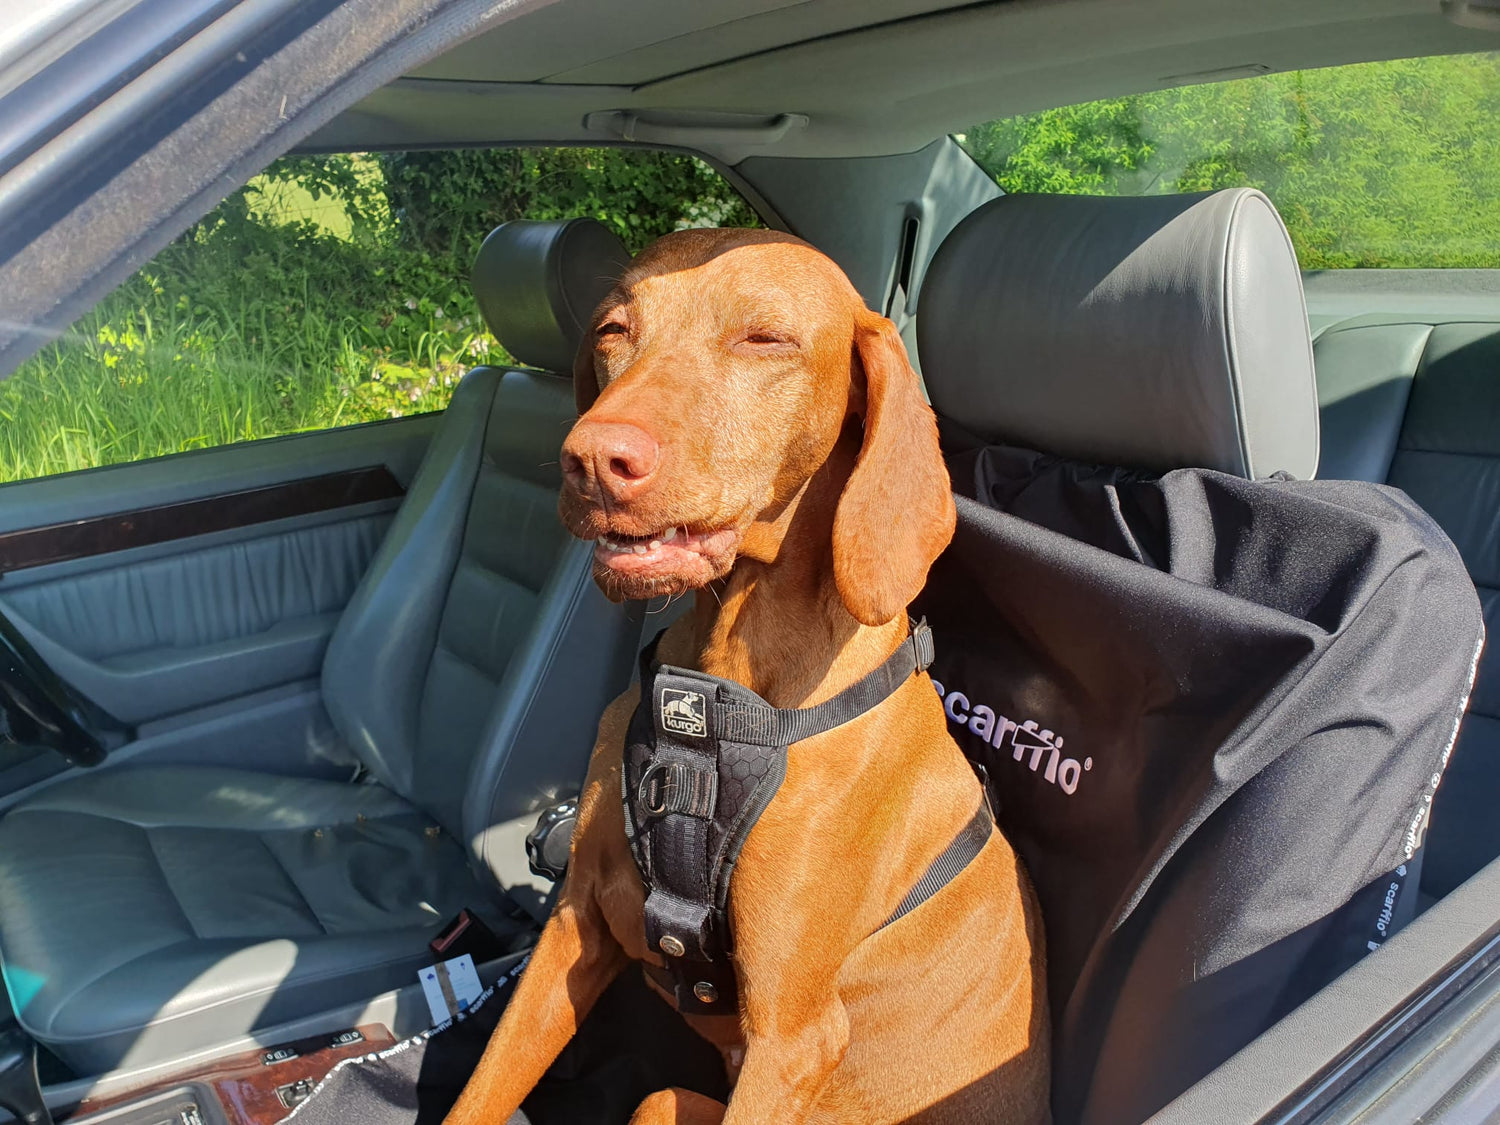 This image shows a gorgeous Auburn coated Hungarian Vizla dog, in glorious sunshine, sitting on a Jet Black scarffio®, which is protecting the classic Mercedes grey leather car seat he is sitting on. 